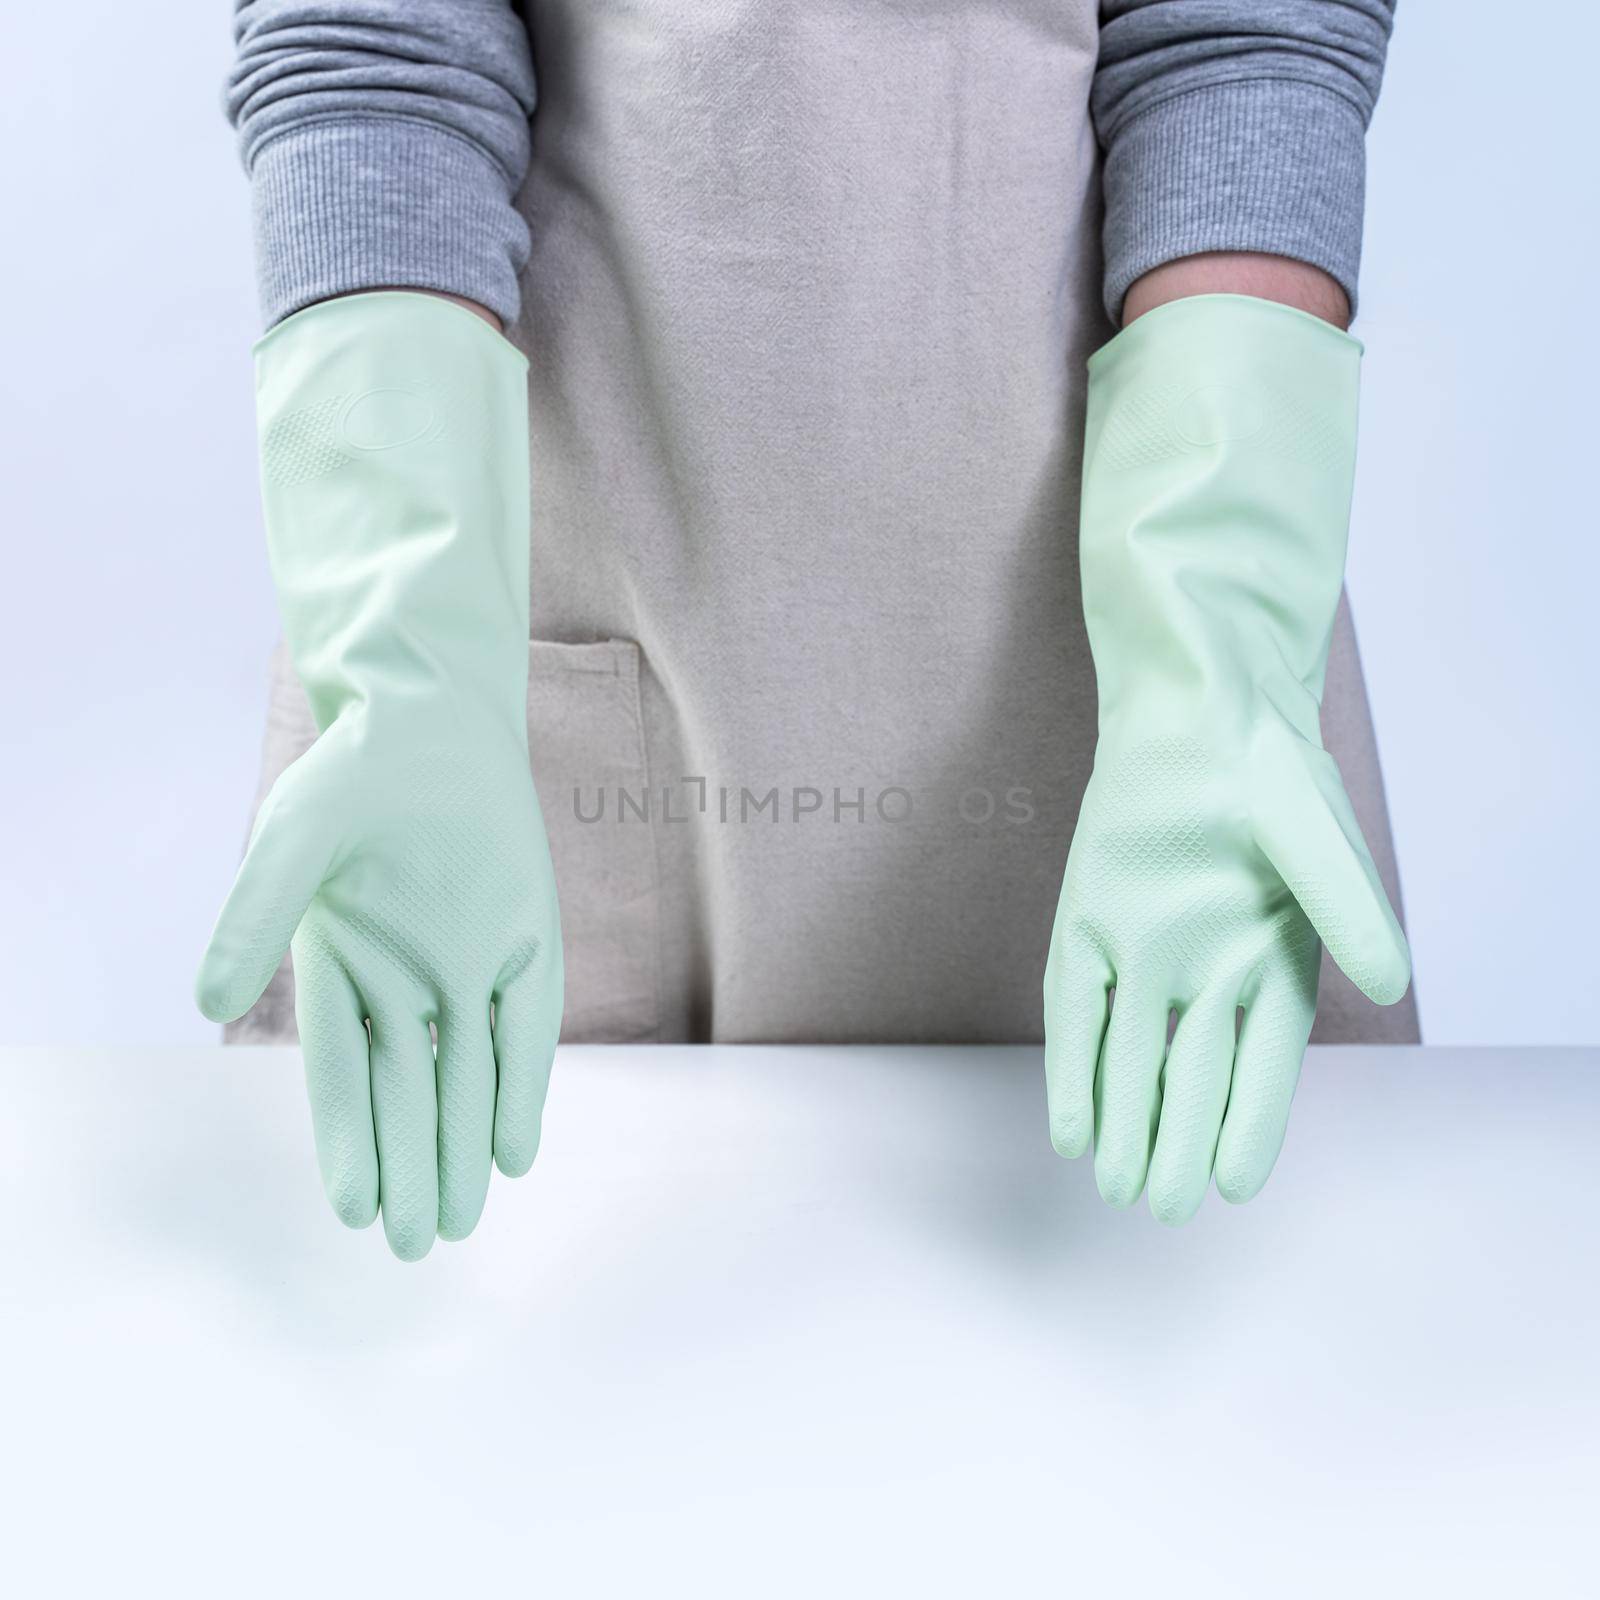 Young woman housekeeper in apron is wearing green gloves to clean the table, concept of preventing virus infection on white background, close up.